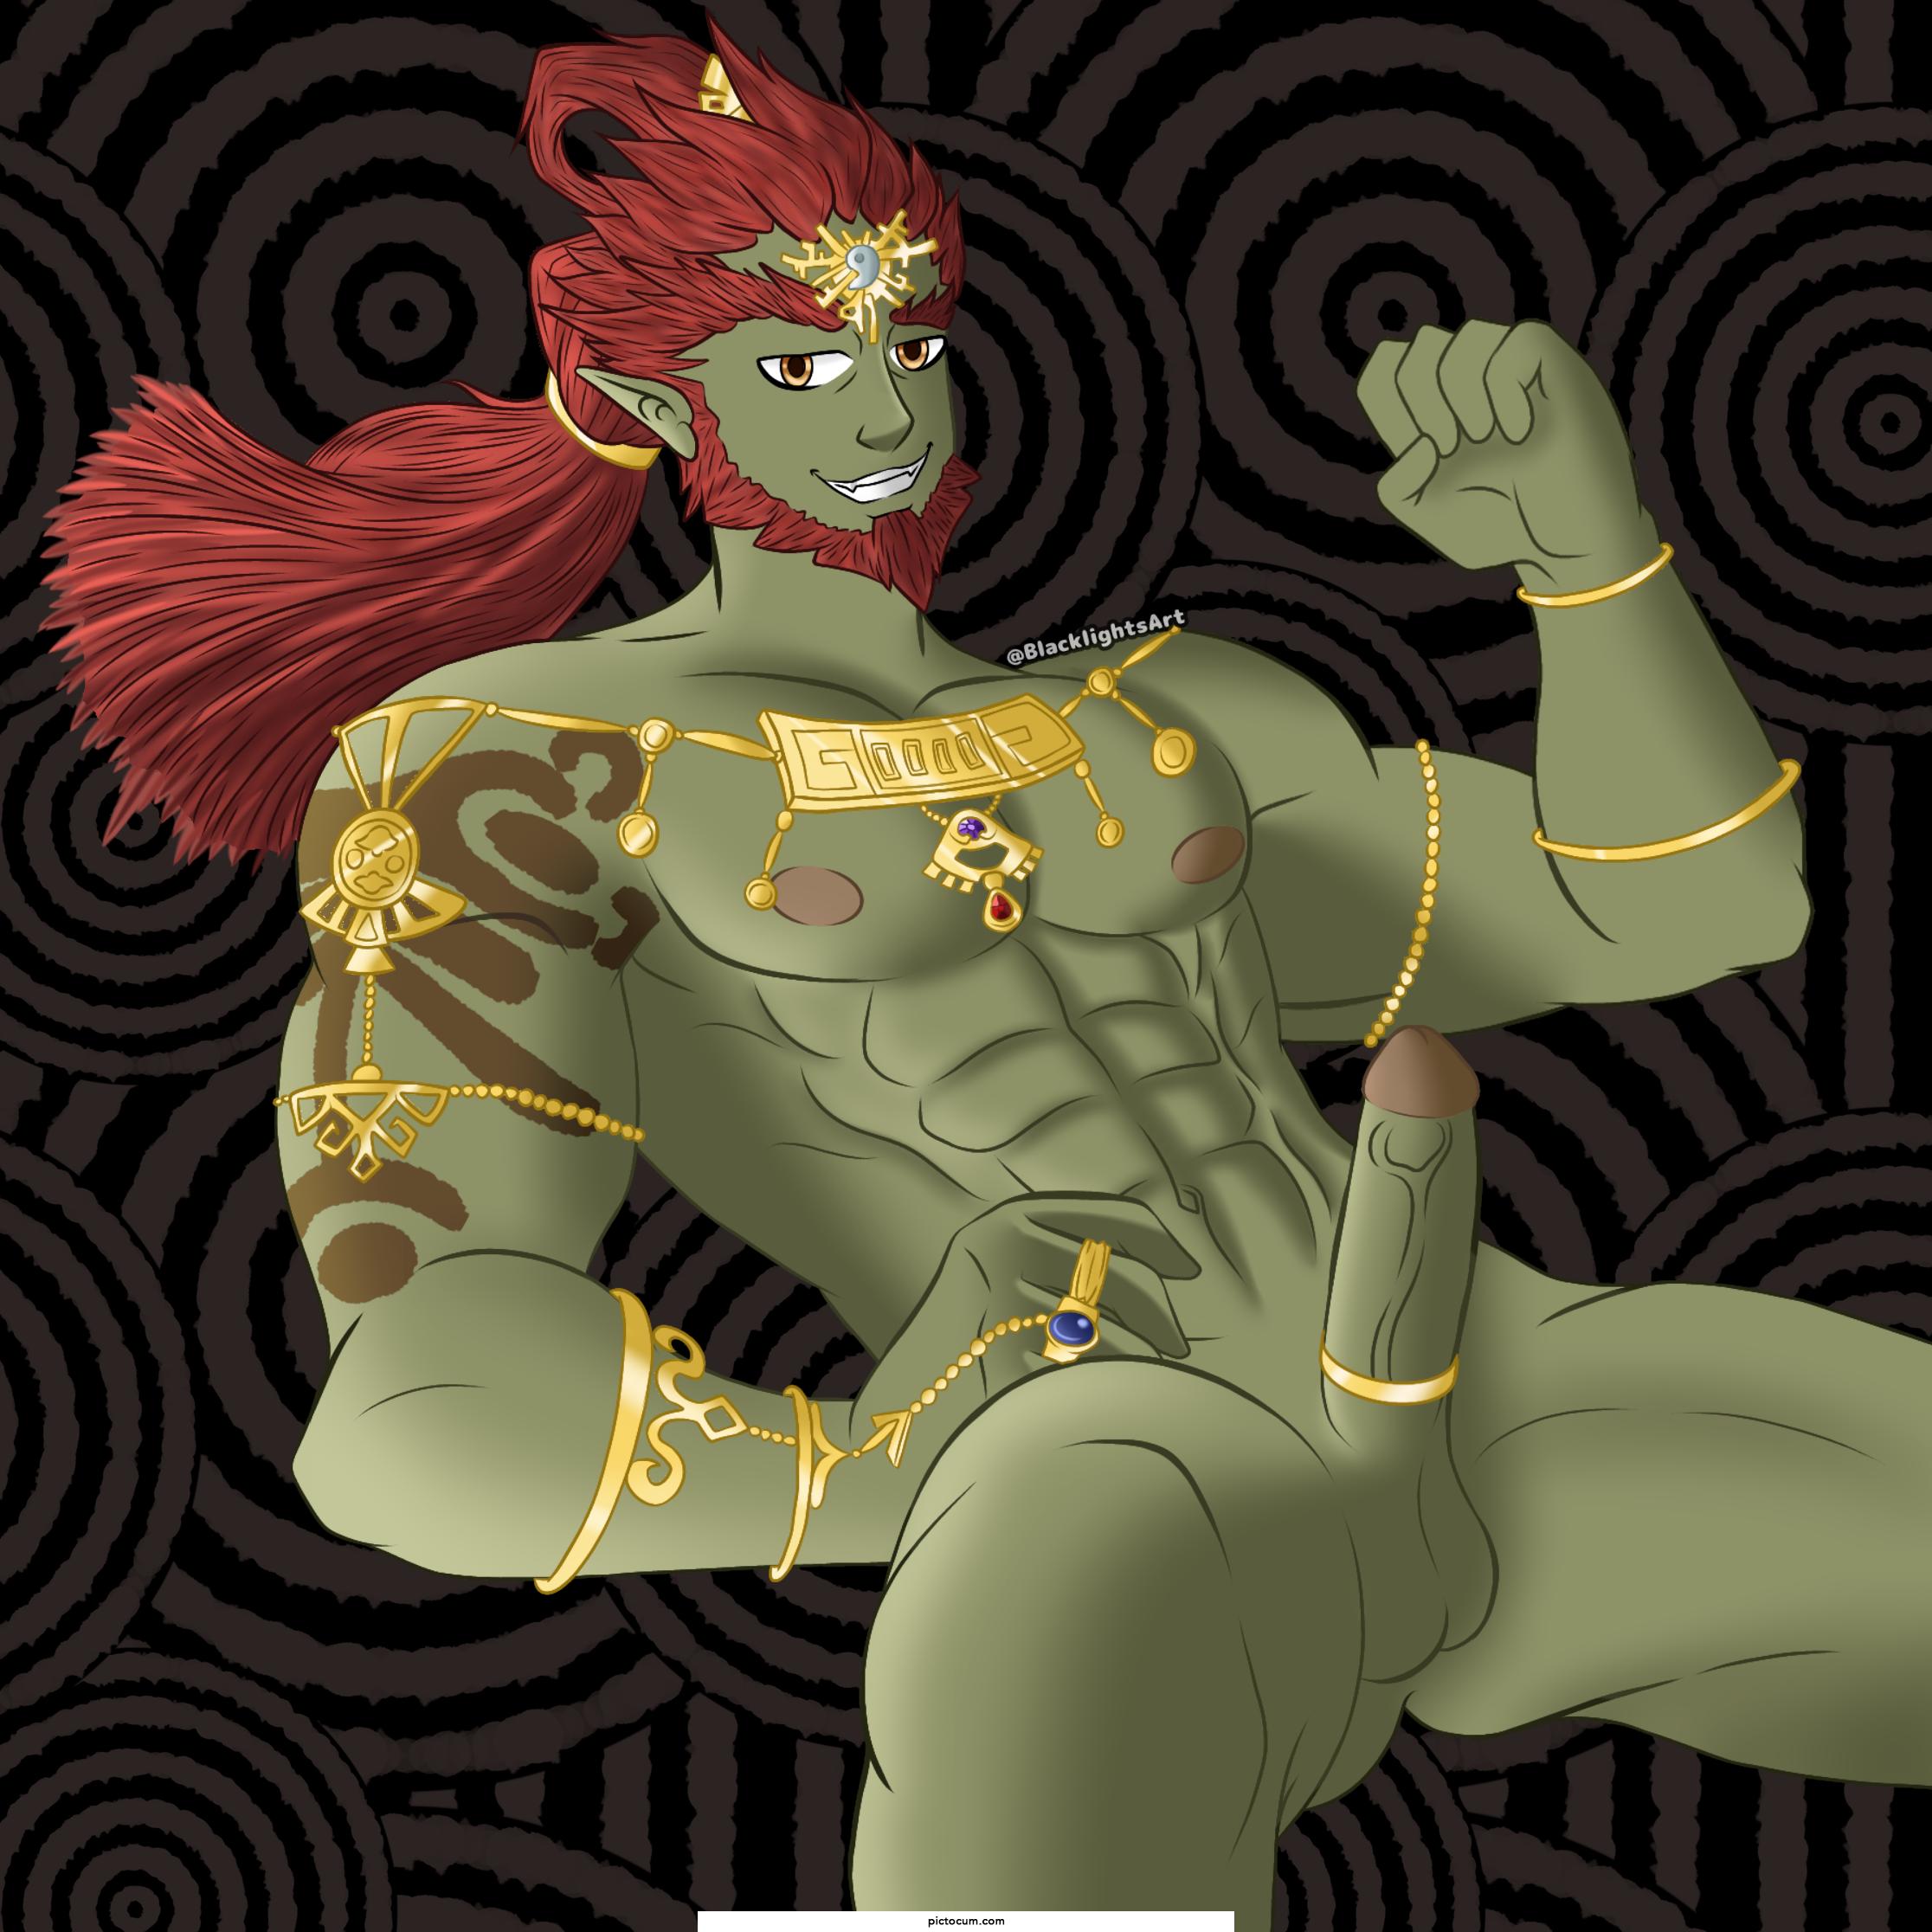 Ganondorf showing off his kingly majesty